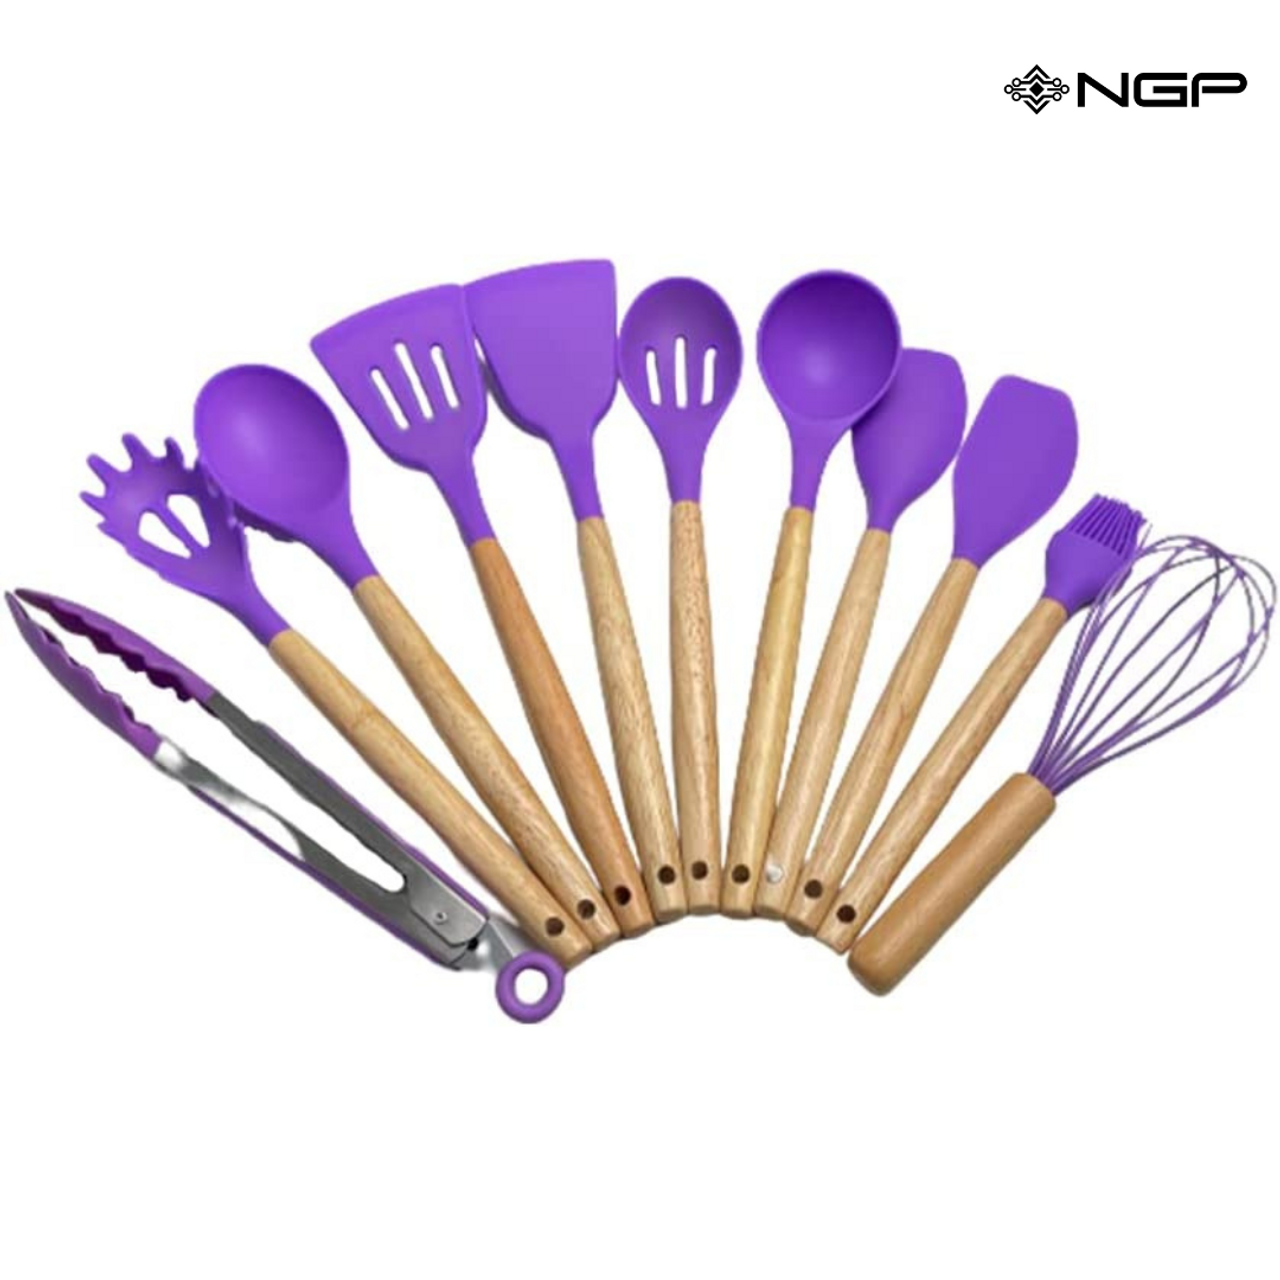 CHEER COLLECTION 12 Piece Multicolor Silicone Spatula Set with Wooden  Handles - Non-Stick Silicone Utensils for Cooking CC-12PCSPATSET-MLT - The  Home